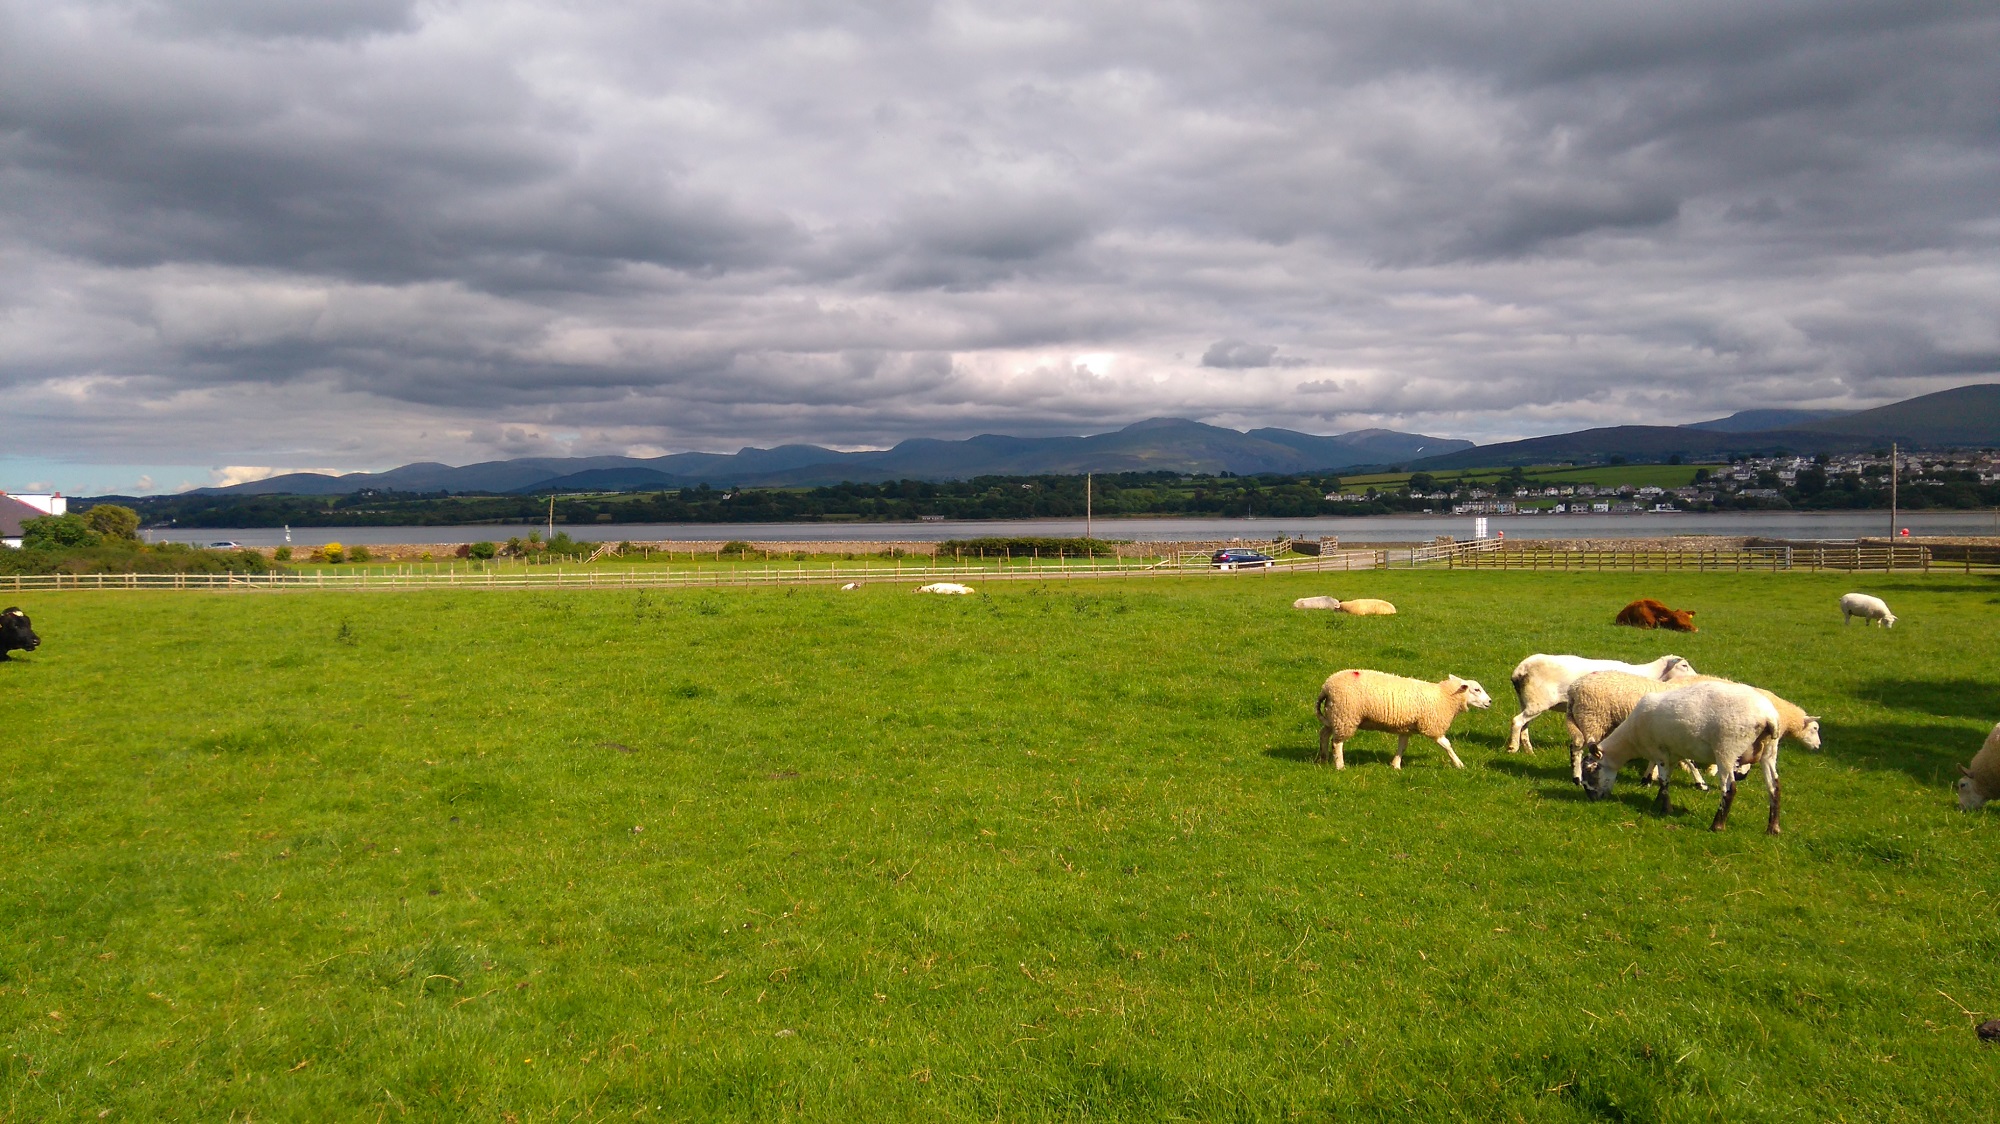 Sheep and cows in a spacious field on a sunny summer day, with the mountains of north Wales visible in the background. Anglesey.